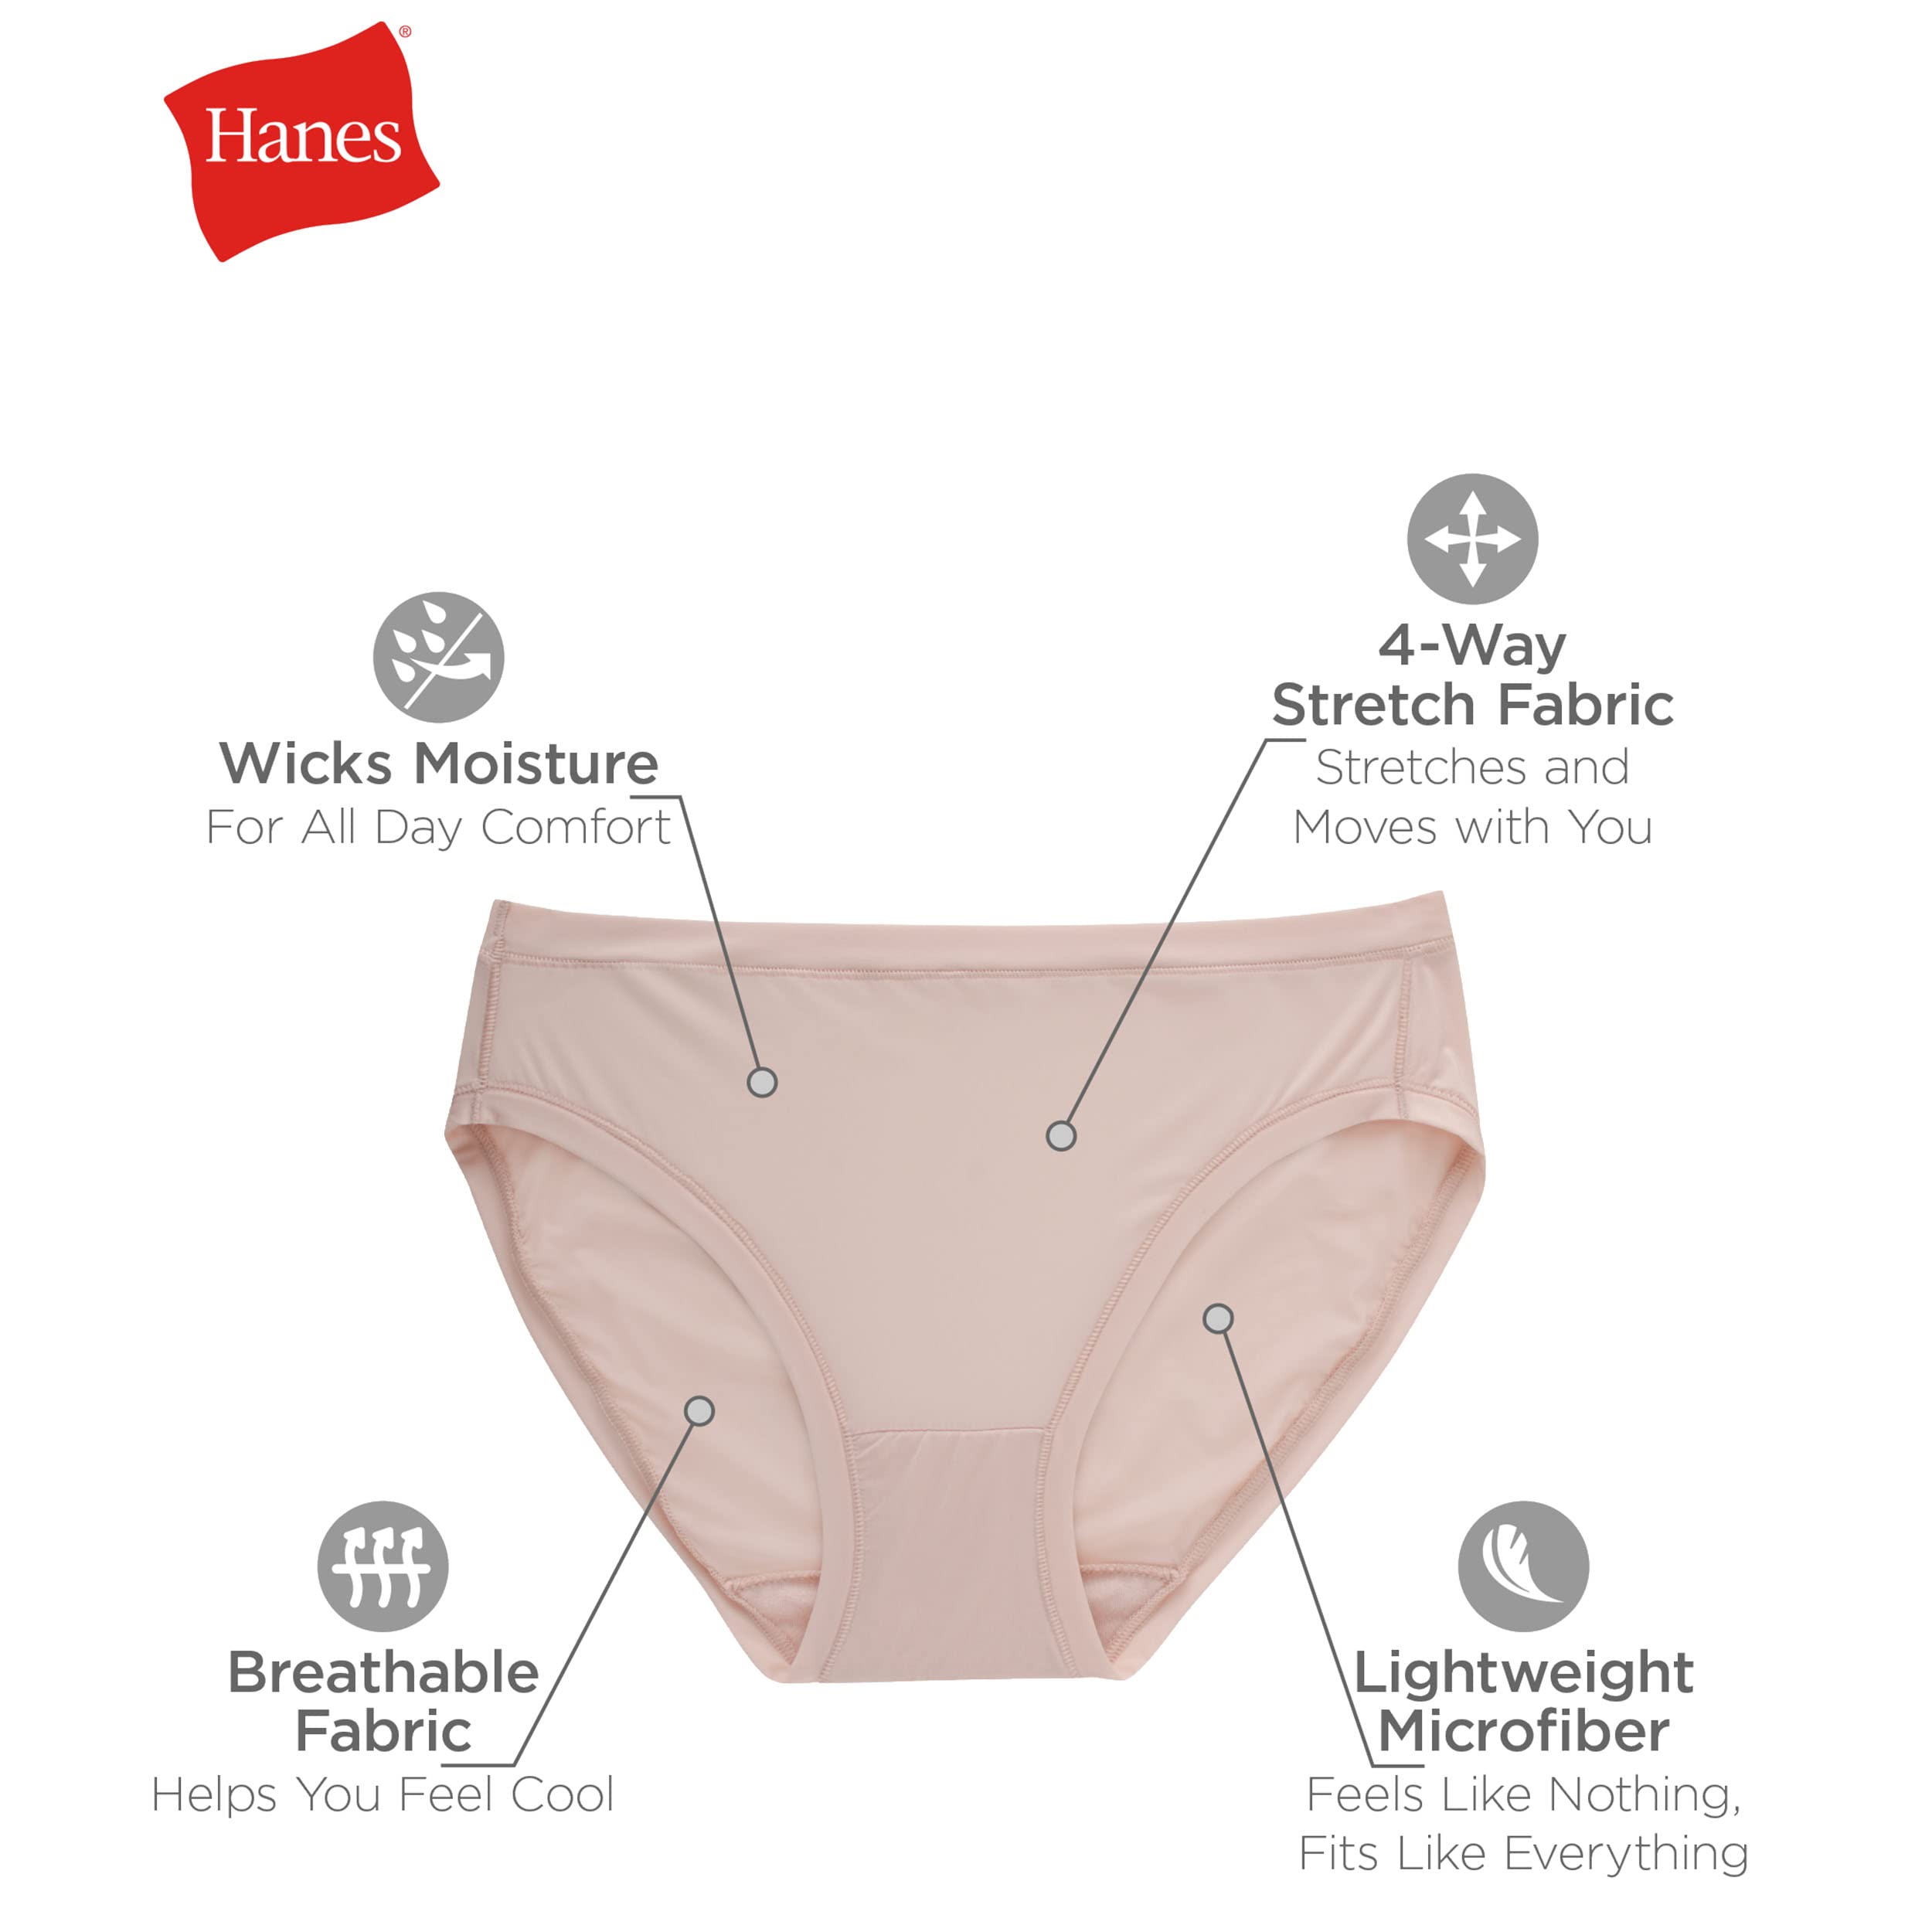 Hanes Women's ComfortFlex Fit Stretch Panties, Cooling Microfiber Underwear, 6-Pack (Colors May Vary)